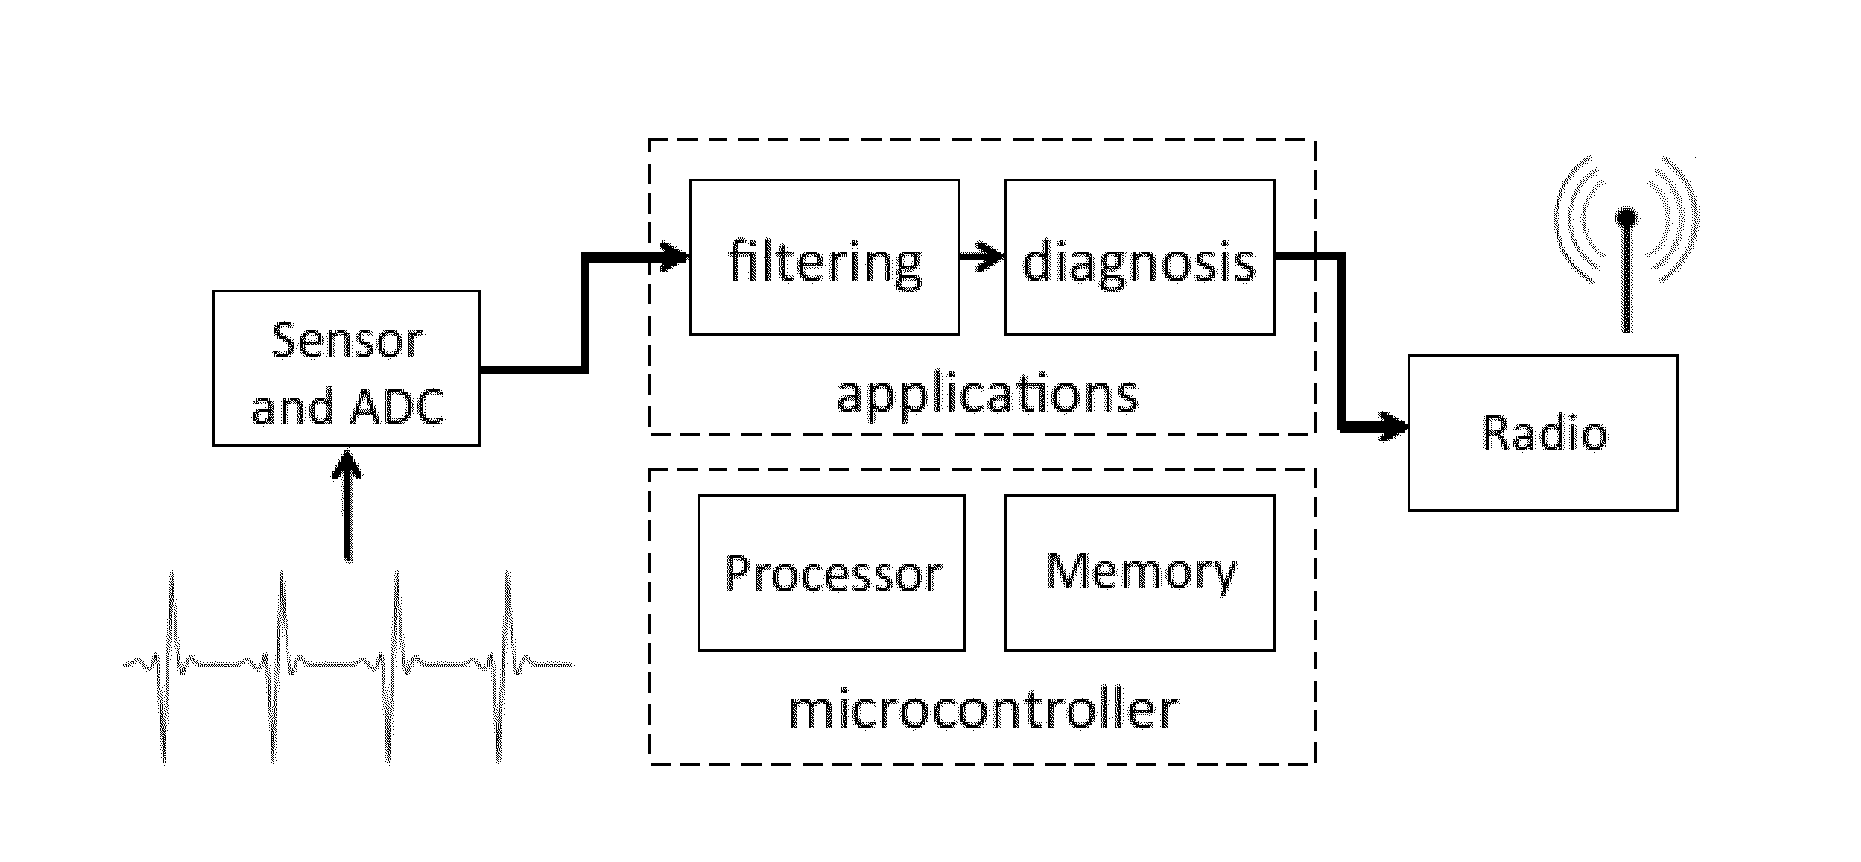 Method for detecting abnormalities in an electrocardiogram